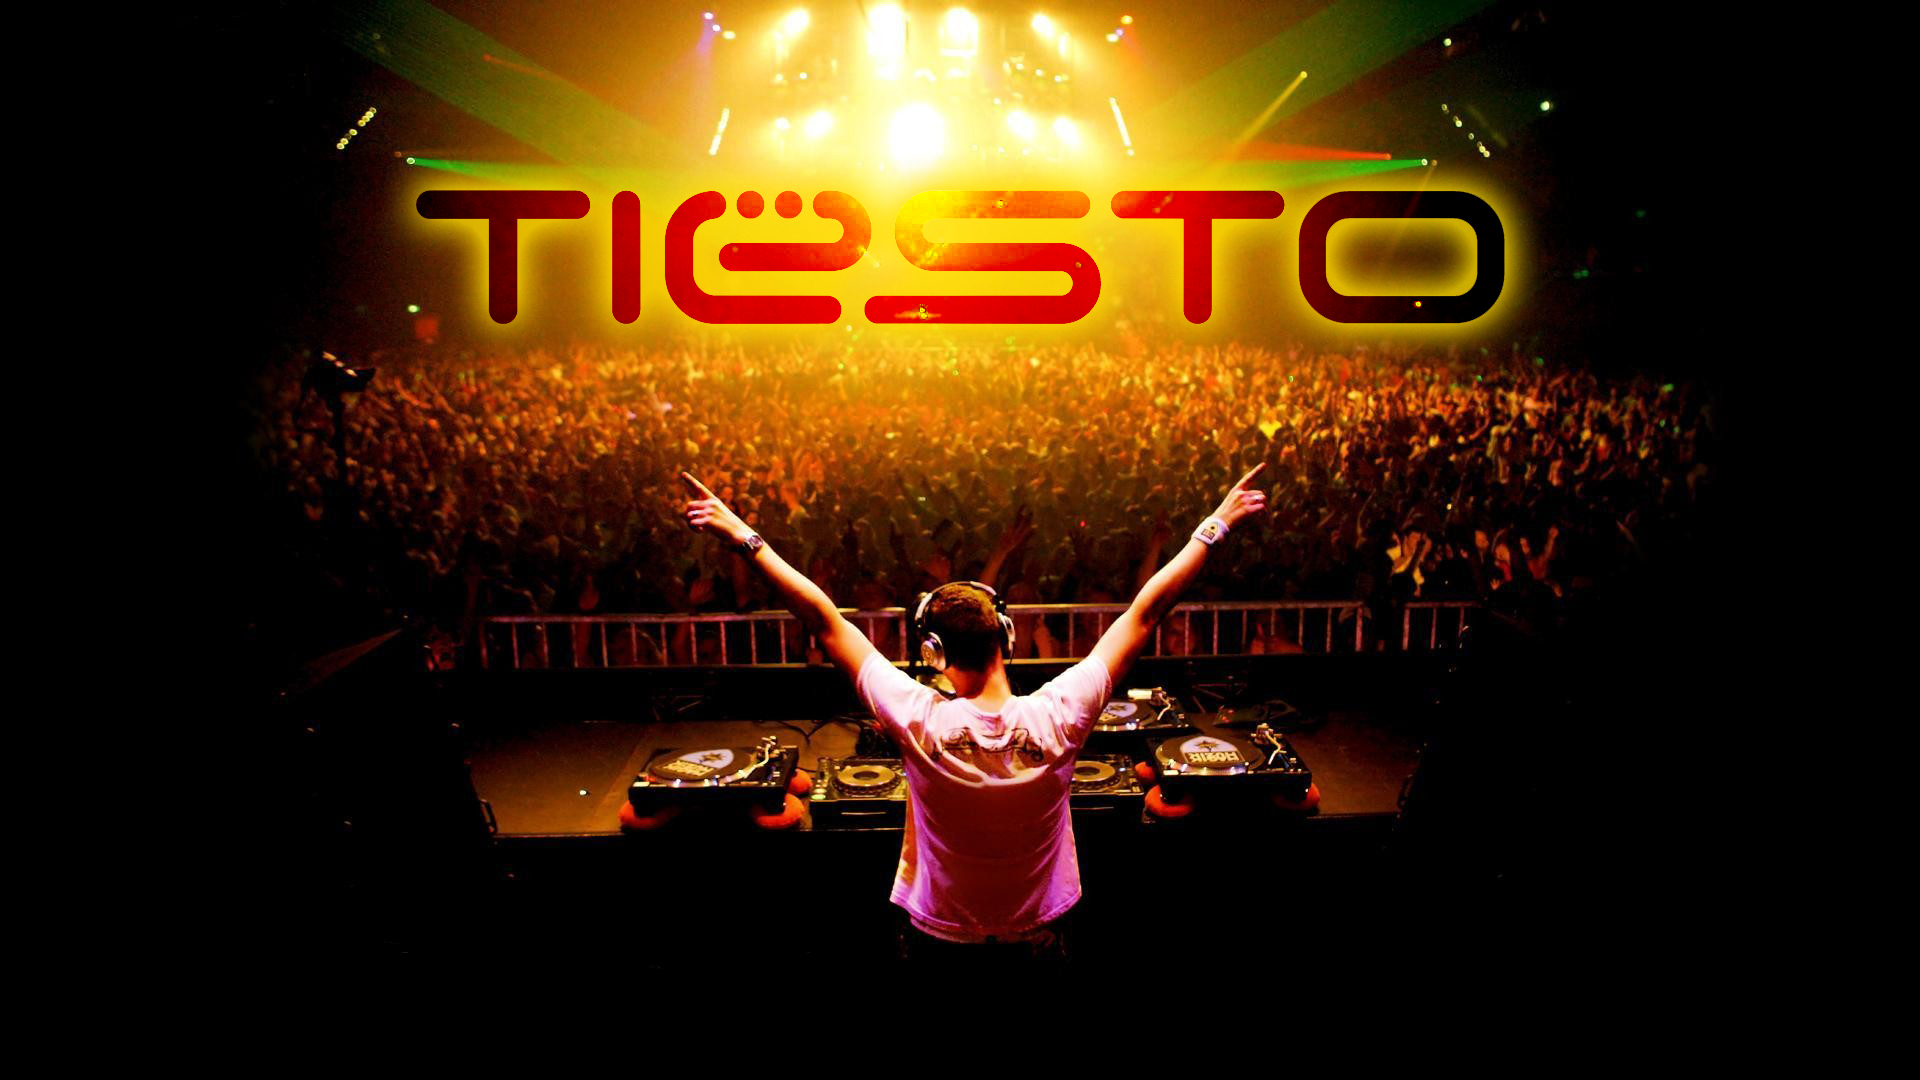 Dj Tiesto Wallpaper   Be your own DJ with the right DJ Mixer